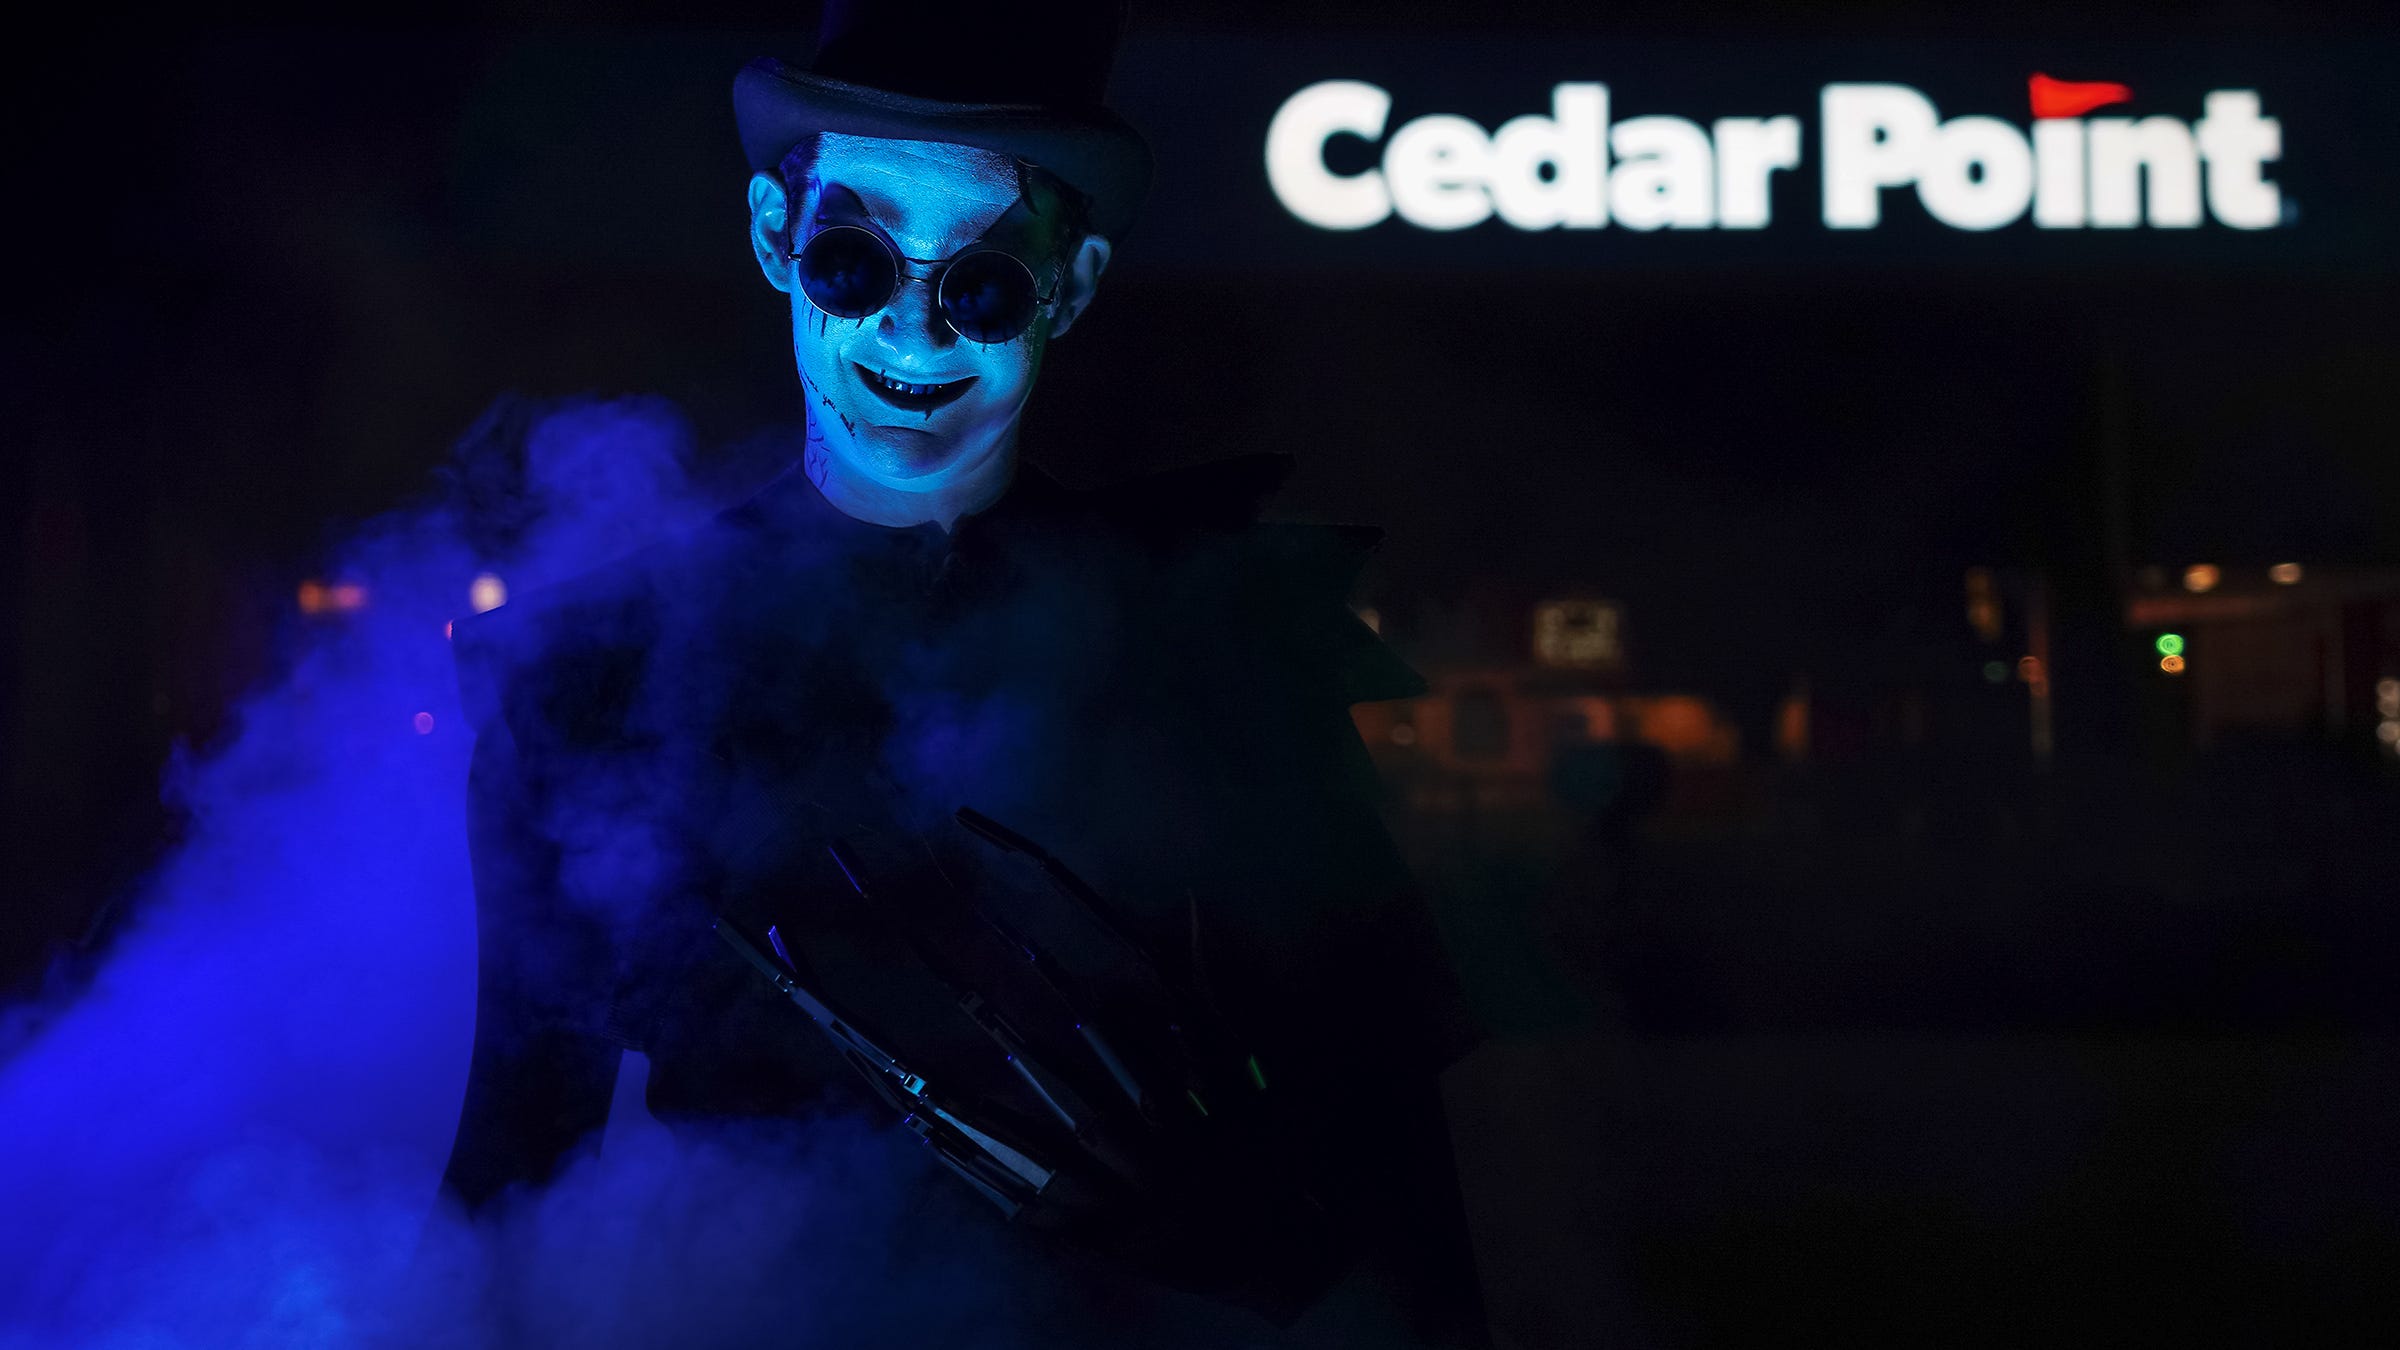 Two New Haunts Open This Fall At Halloweekends At Cedar Point